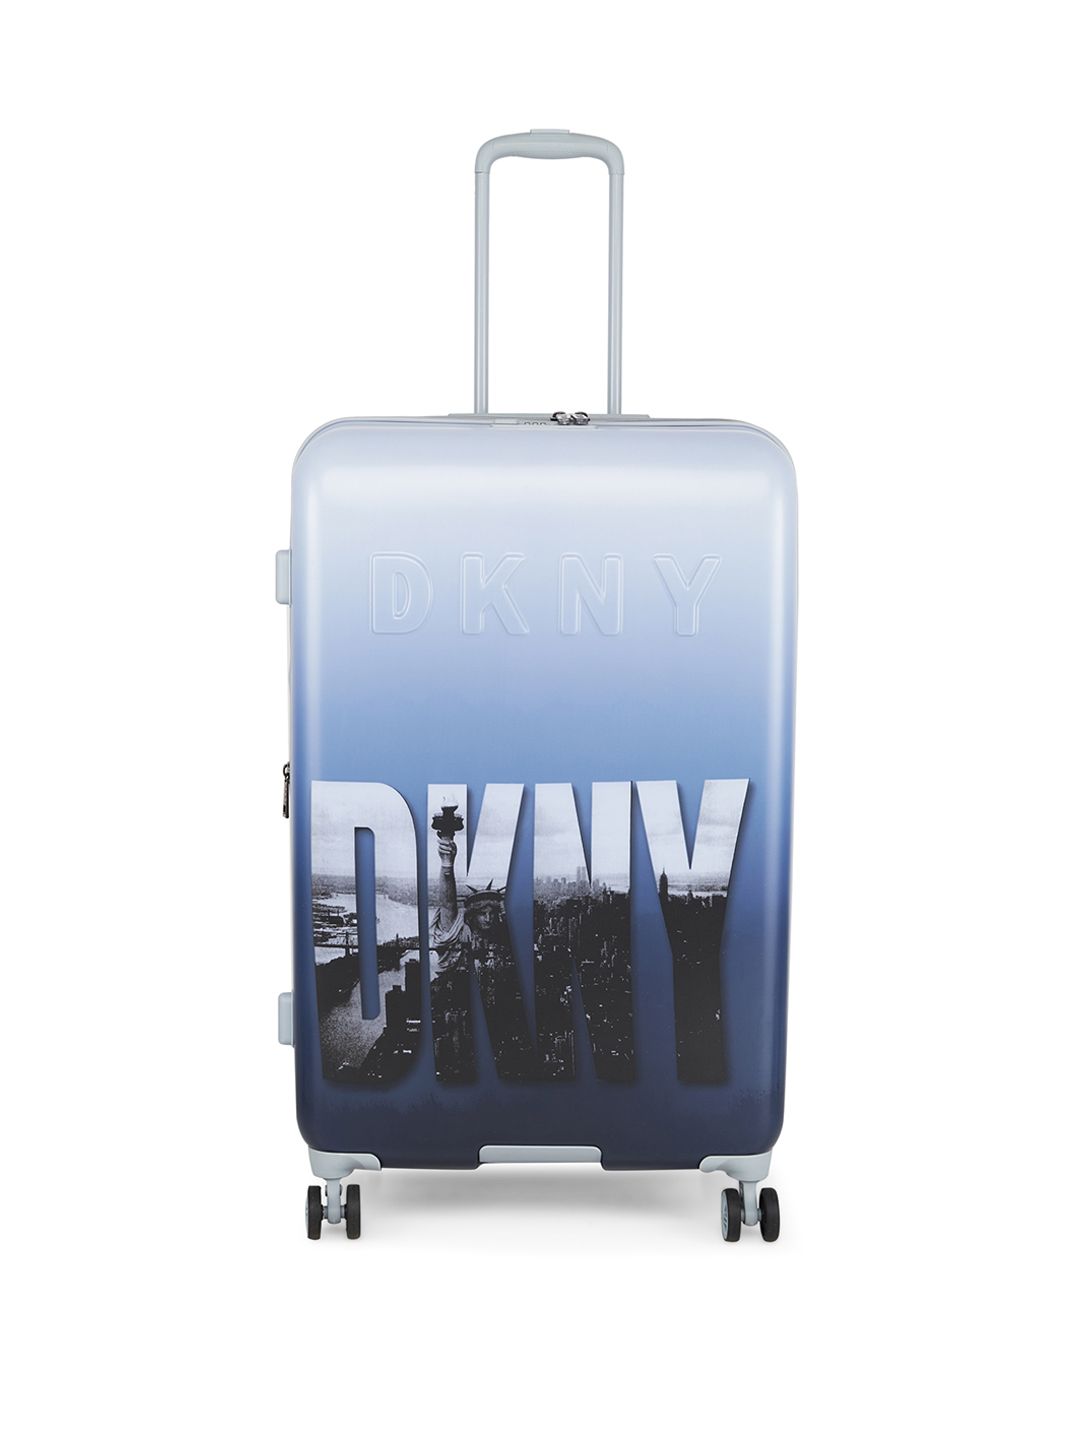 DKNY Blue Printed Hard Large Suitcase Price in India